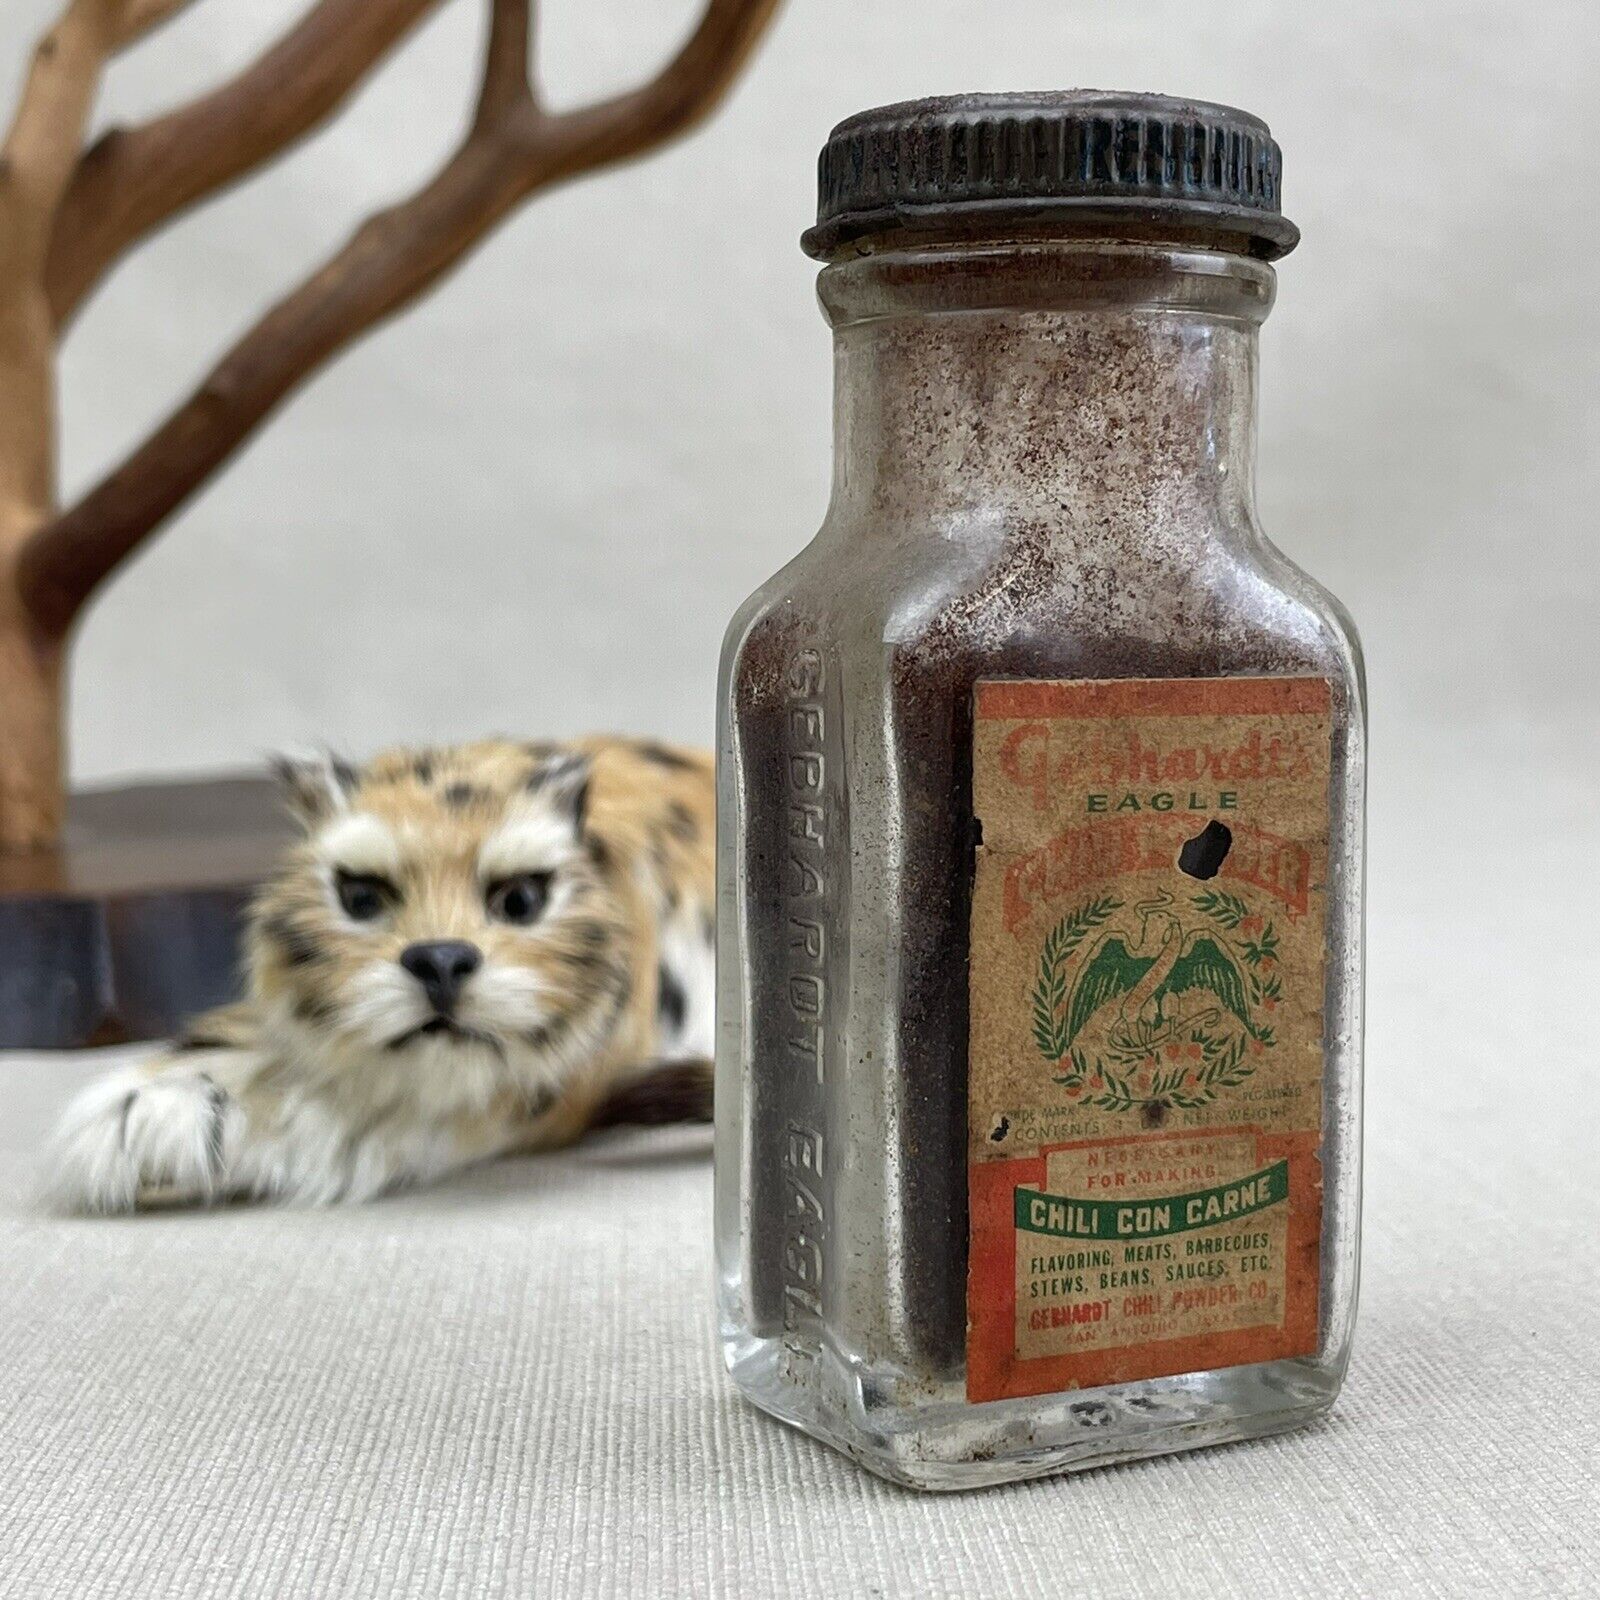 Gebhardt Eagle Chili Con Carne Powder Glass Bottle / Paper Label with Contents